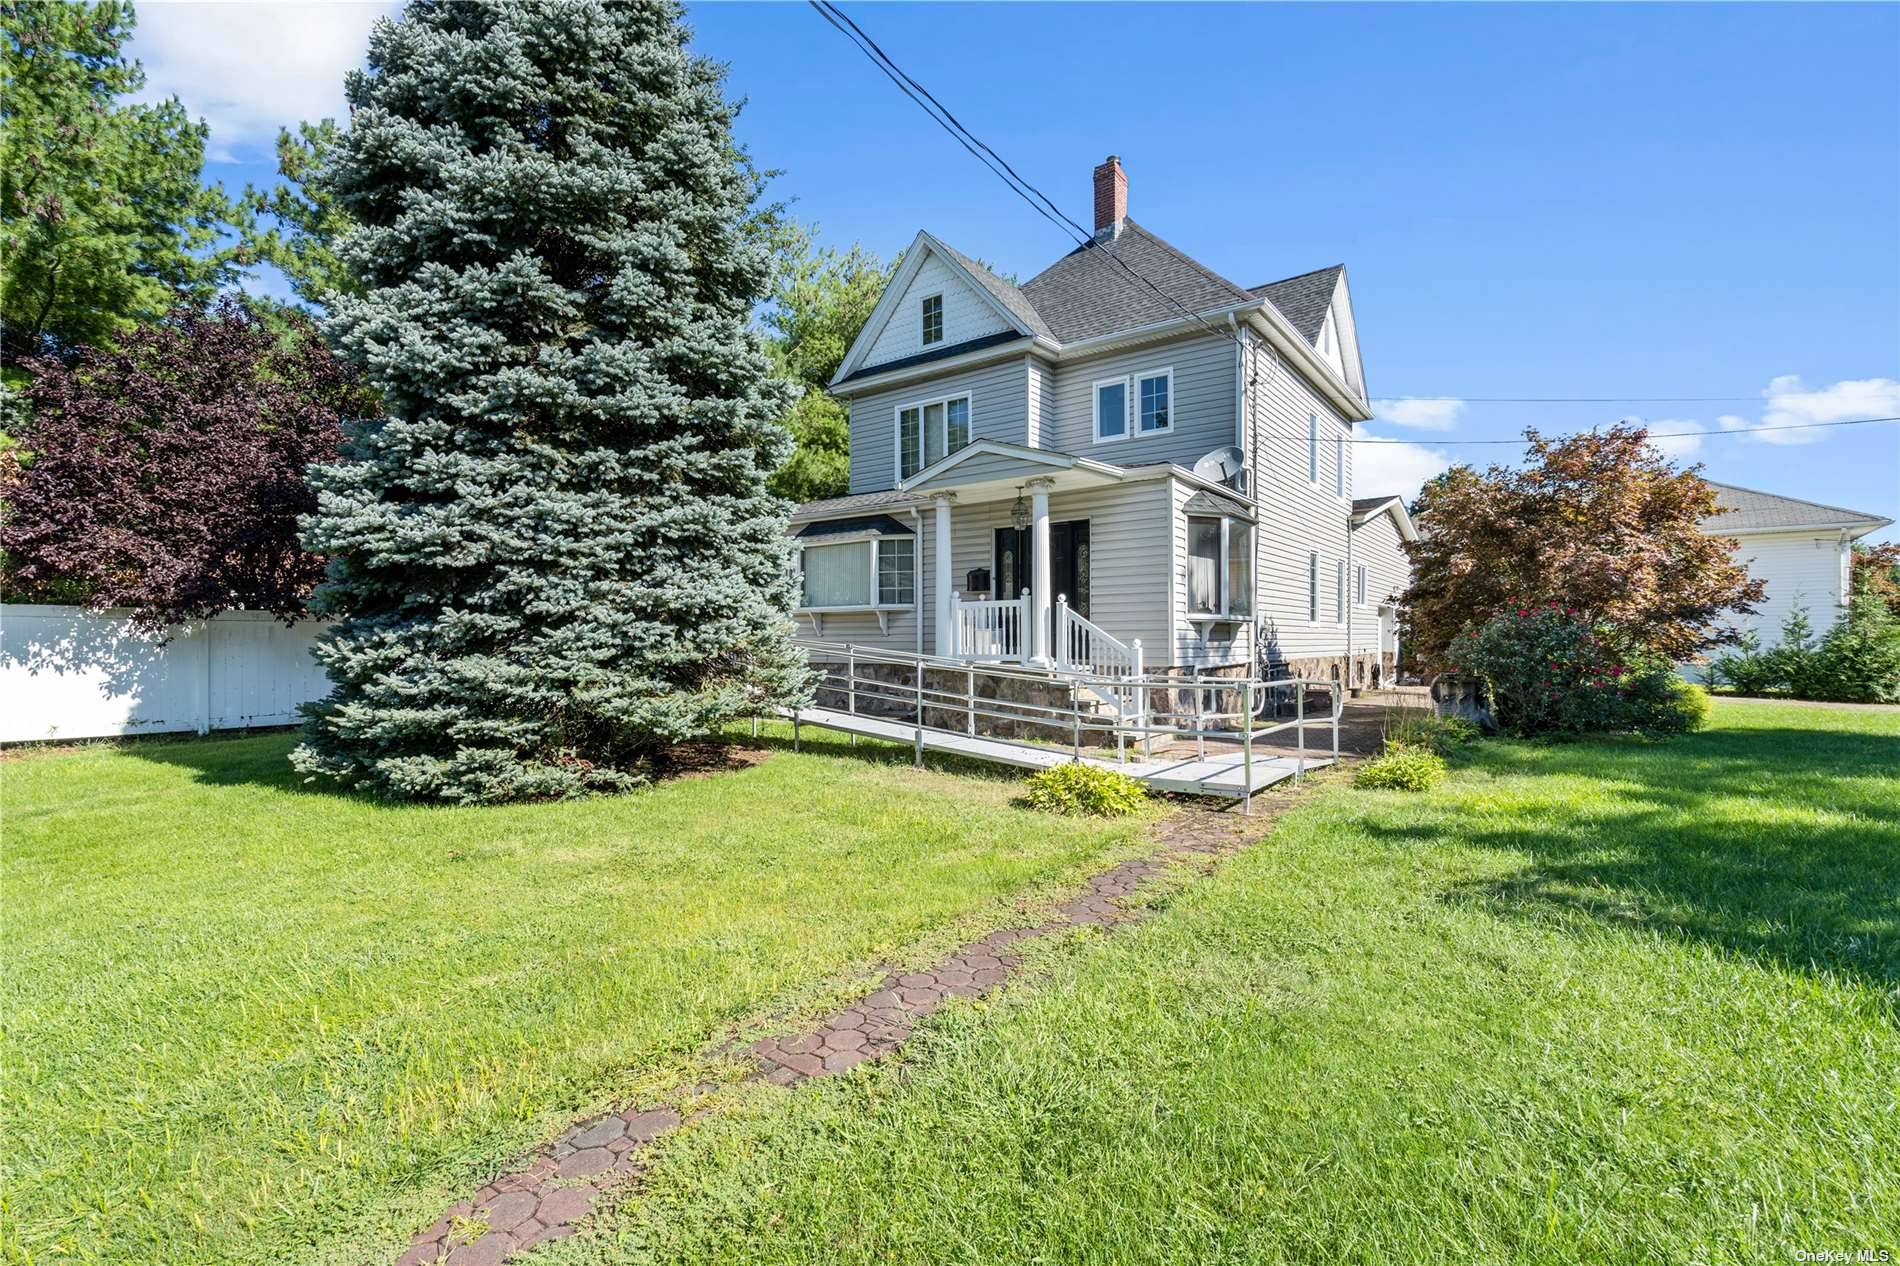 Charming Colonial house is situated on an oversized corner lot, providing ample space and privacy, in the heart of Rockville Centre.